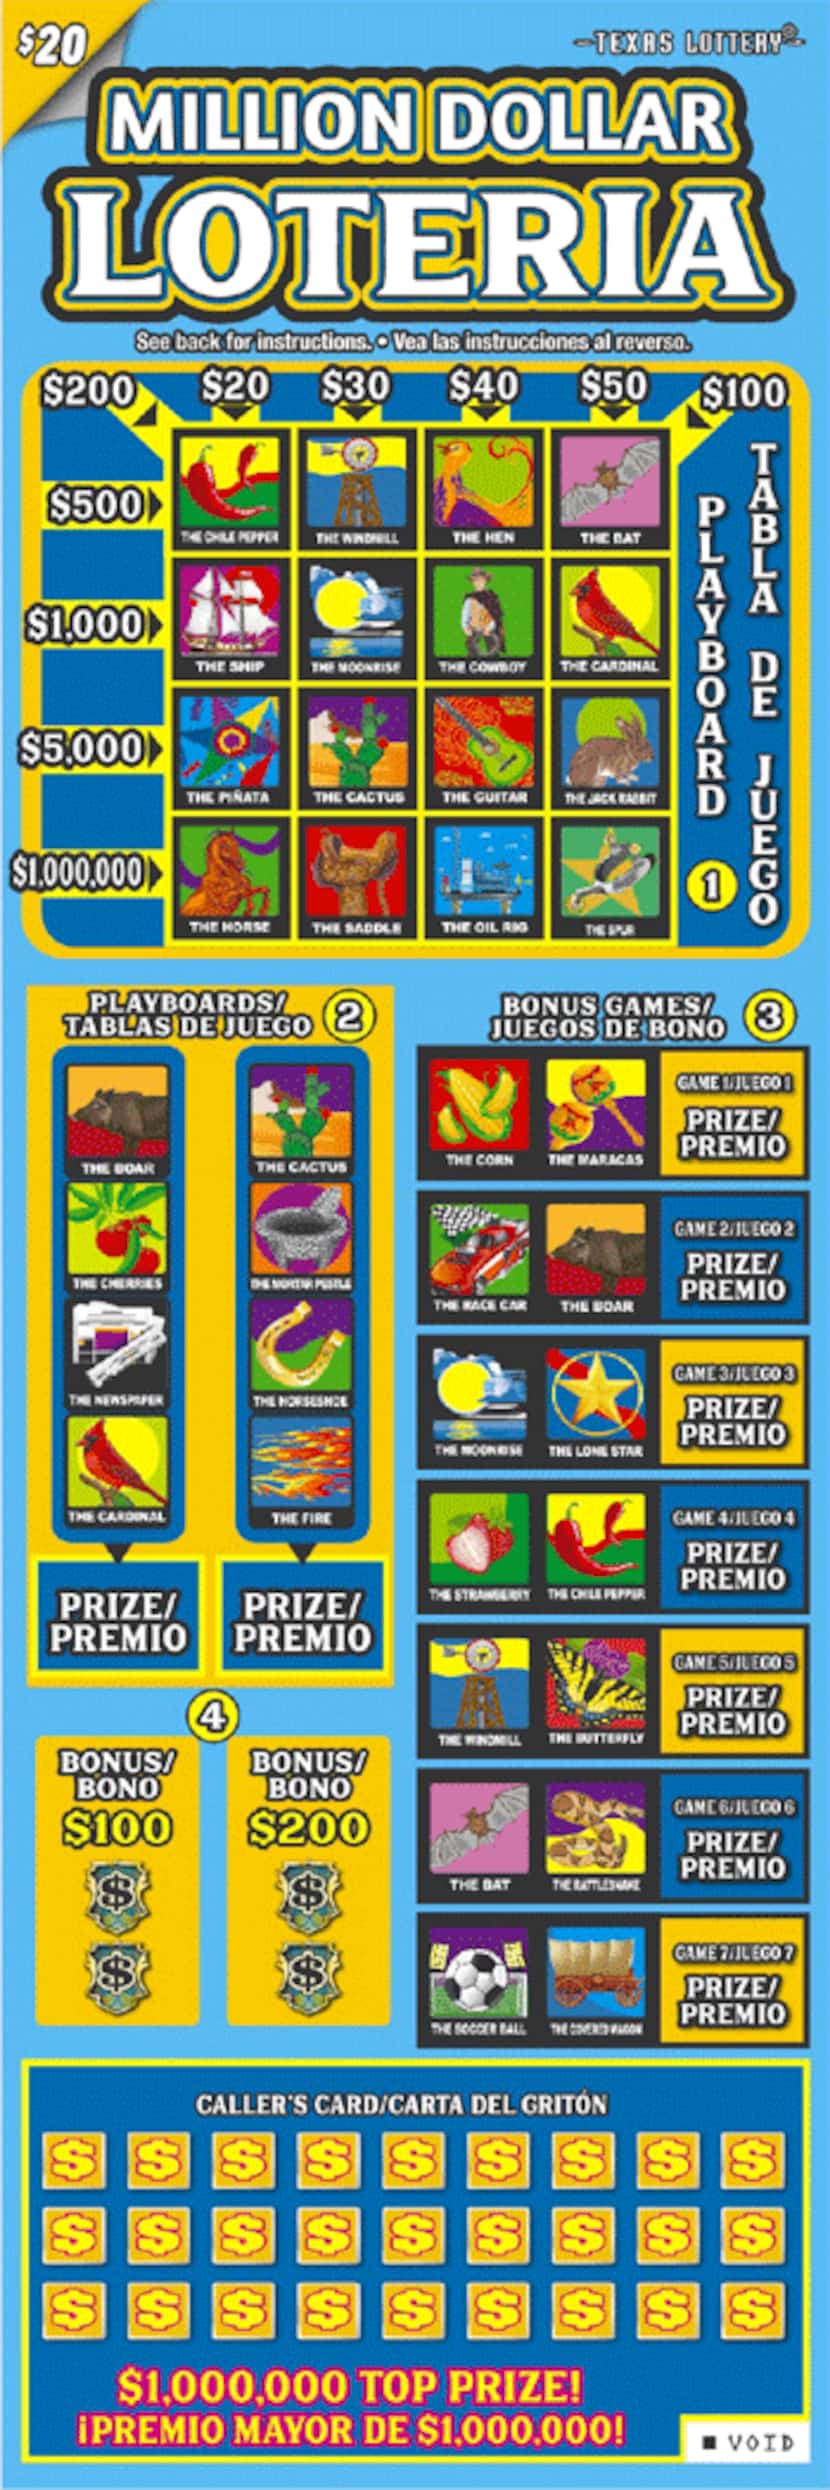 Overall odds of winning any prize in Million Dollar Loteria are 1 in 3.27.